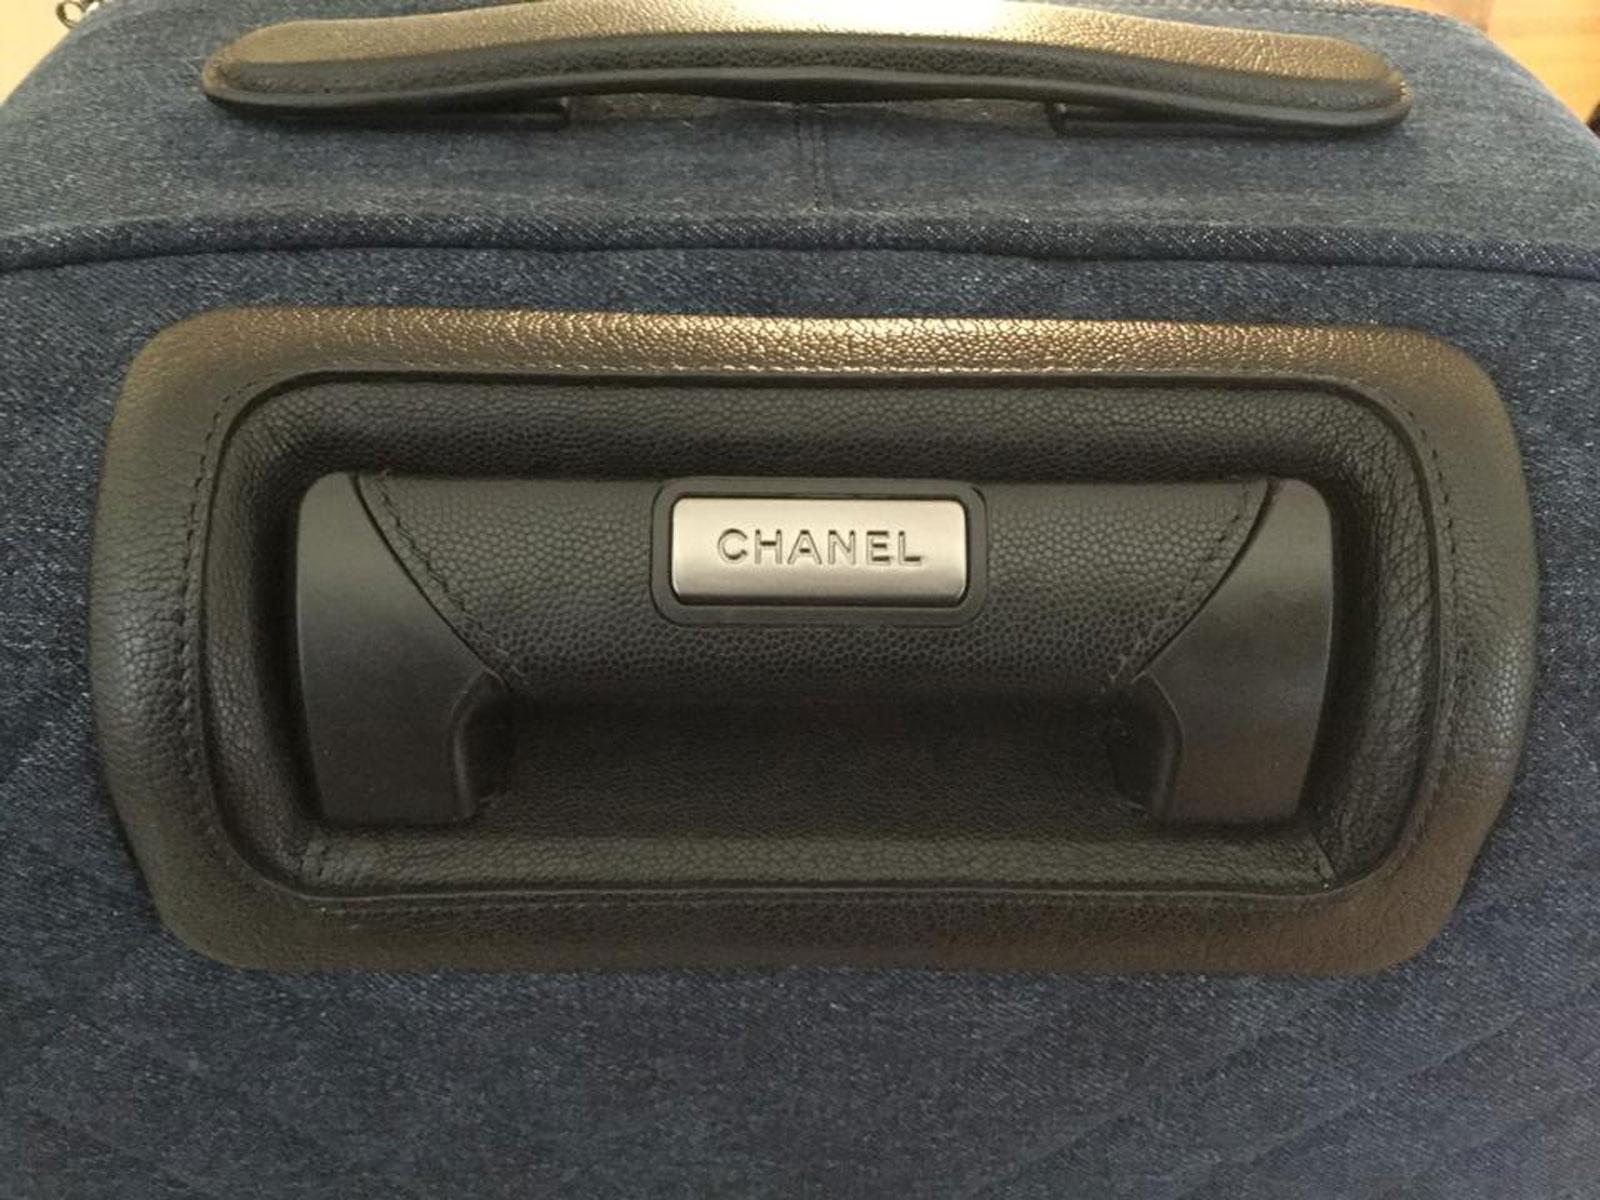 Chanel Coco Charm Denim Jean Trolley Travel Luggage Rolling Carry On Bag For Sale 1